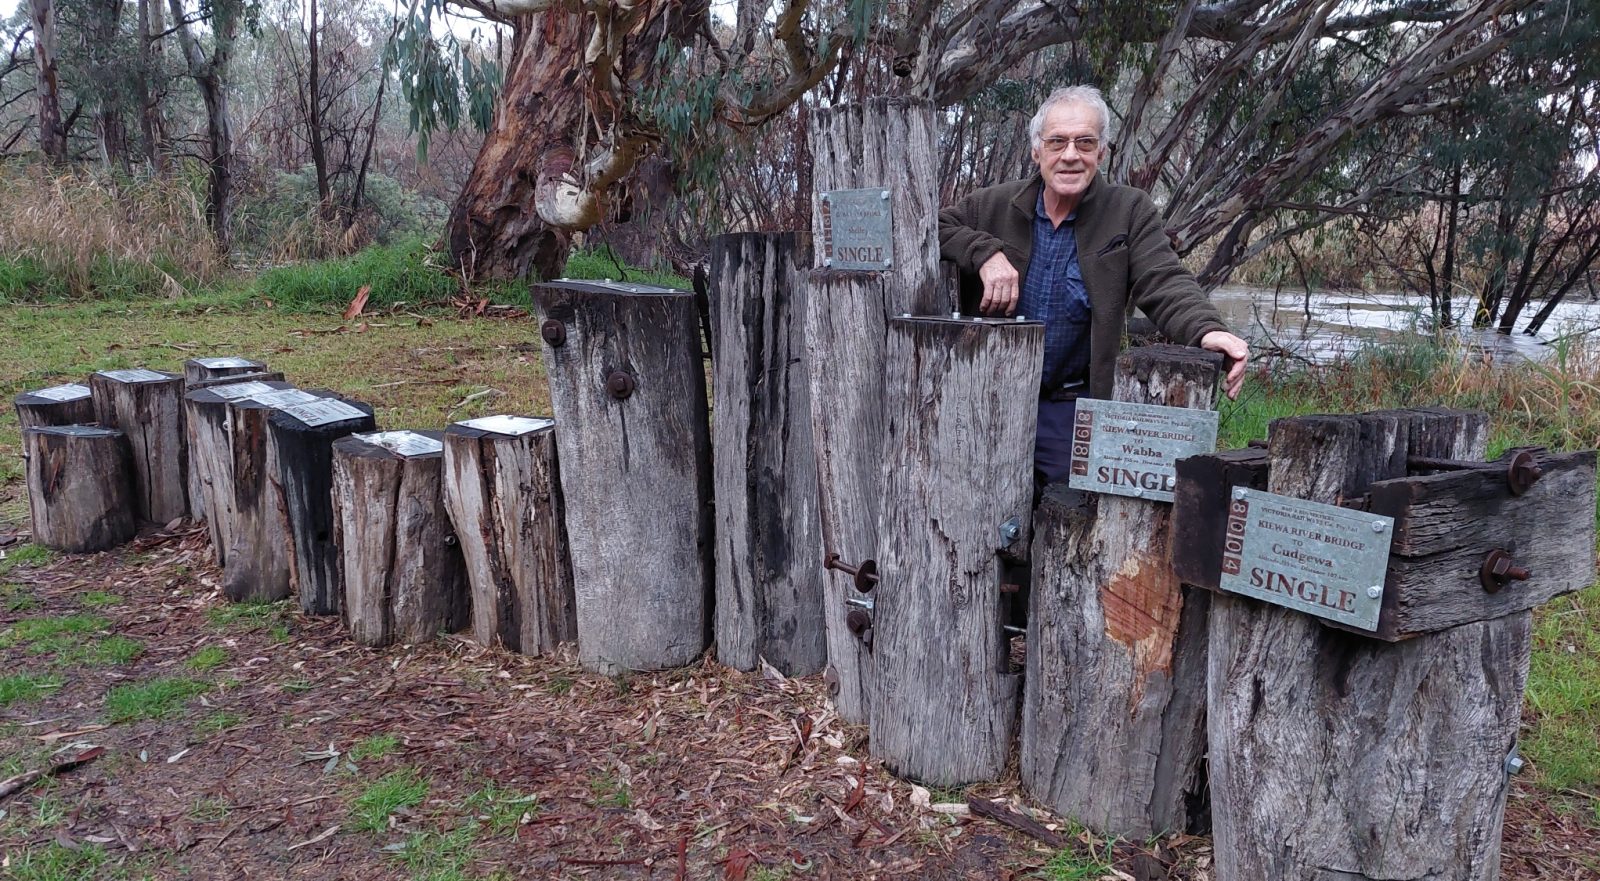 The artist Max Laubli standing behind his sculpture. The sculpture is made of upright old timber bridge posts, placed at duifferent heights to represent the different heights of the railway stations on the line.